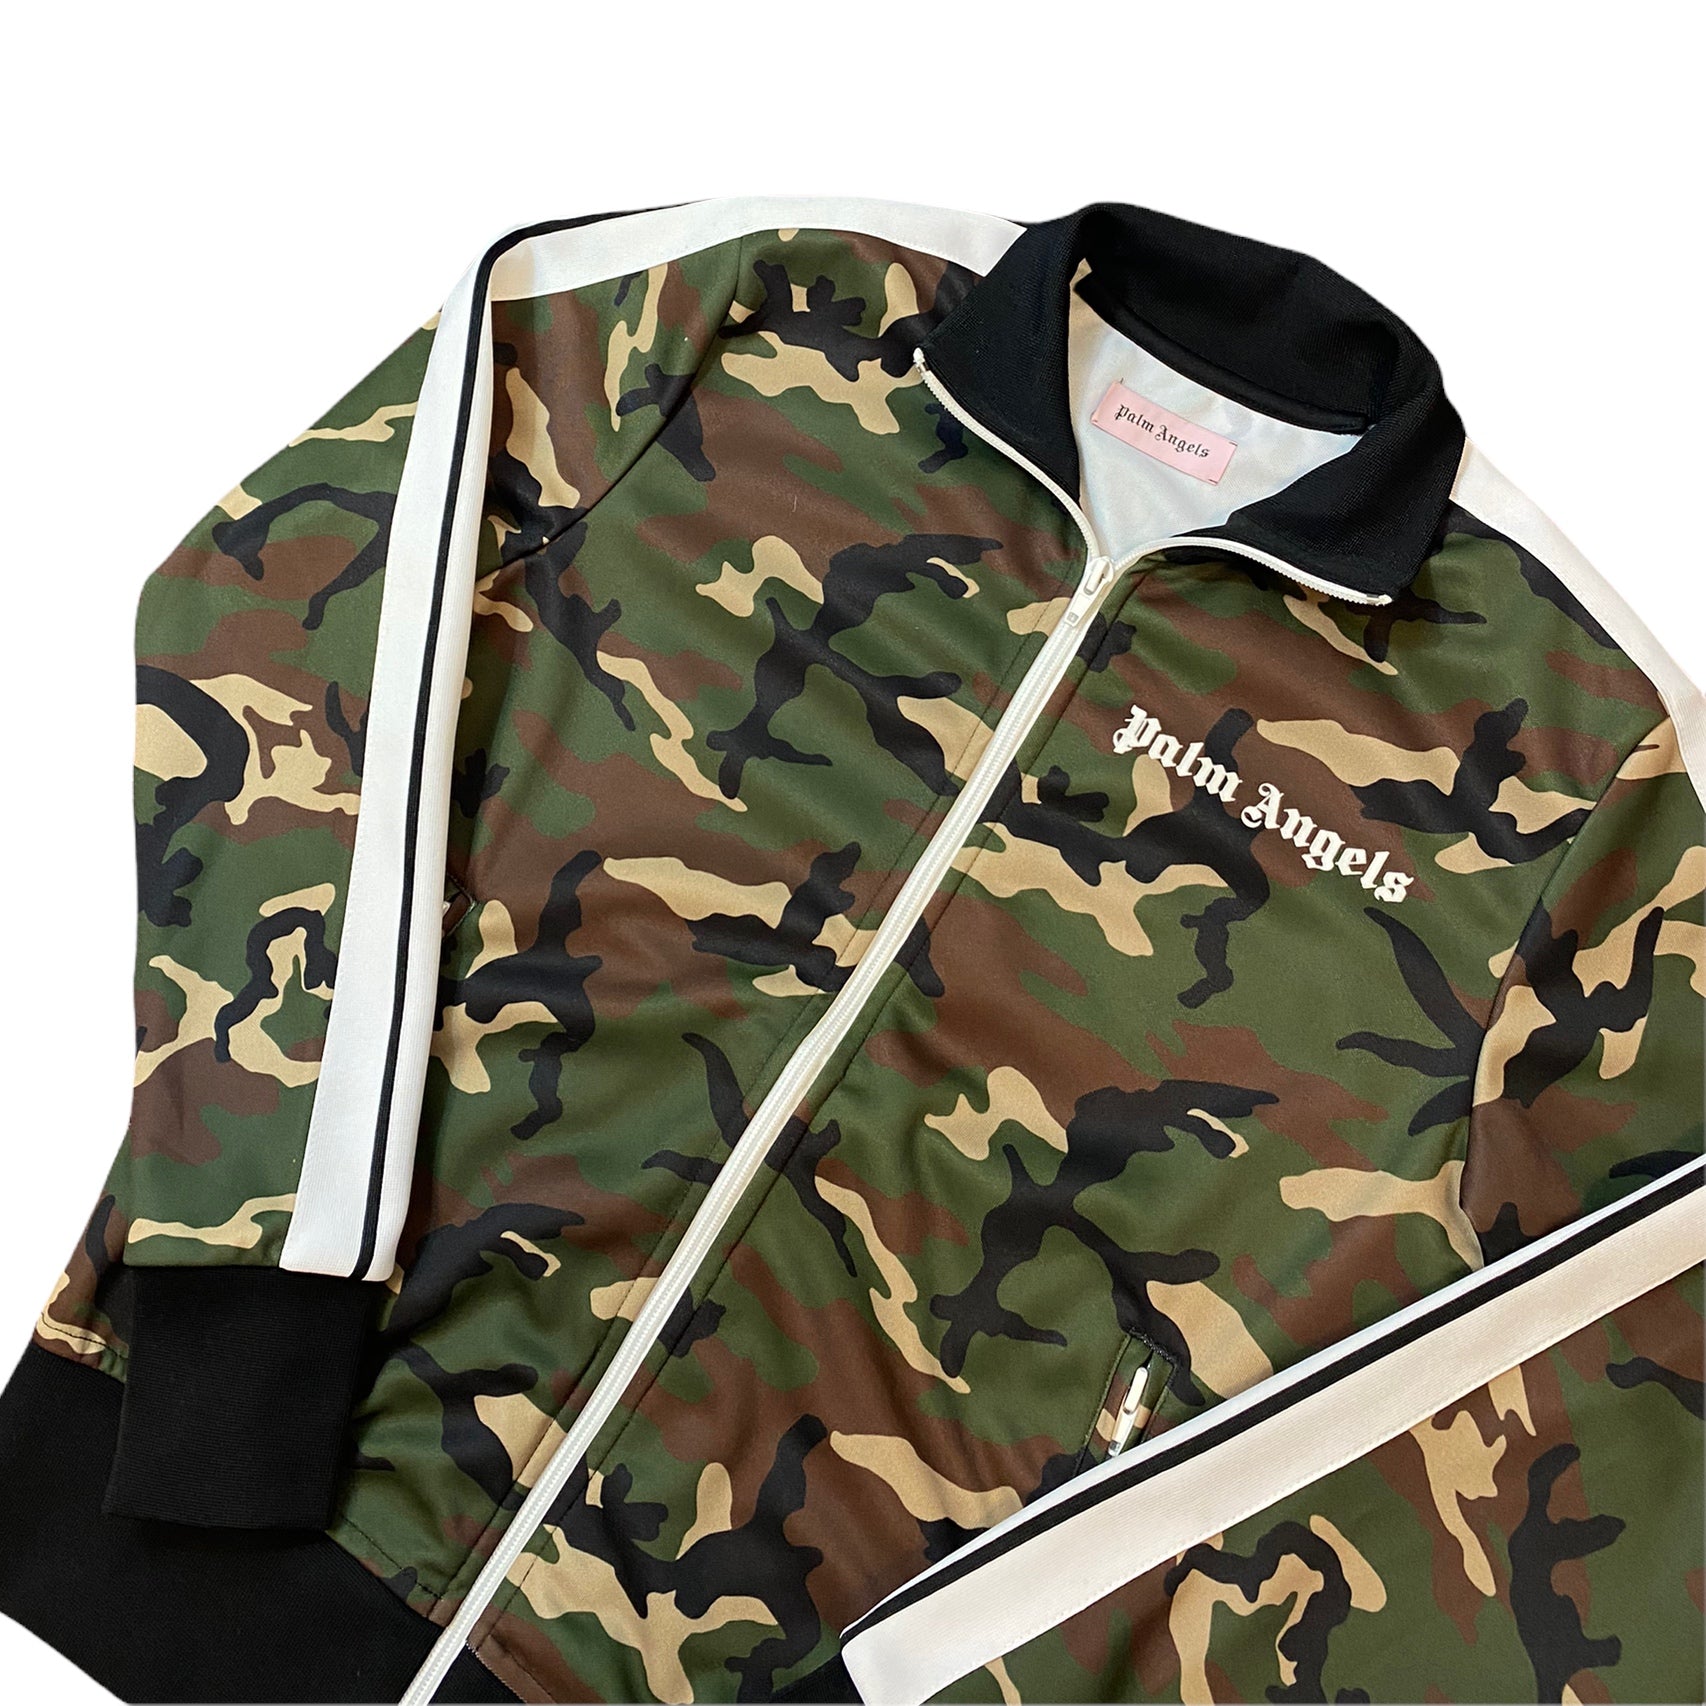 Palm Angels Zip Up Track Jacket in Camo